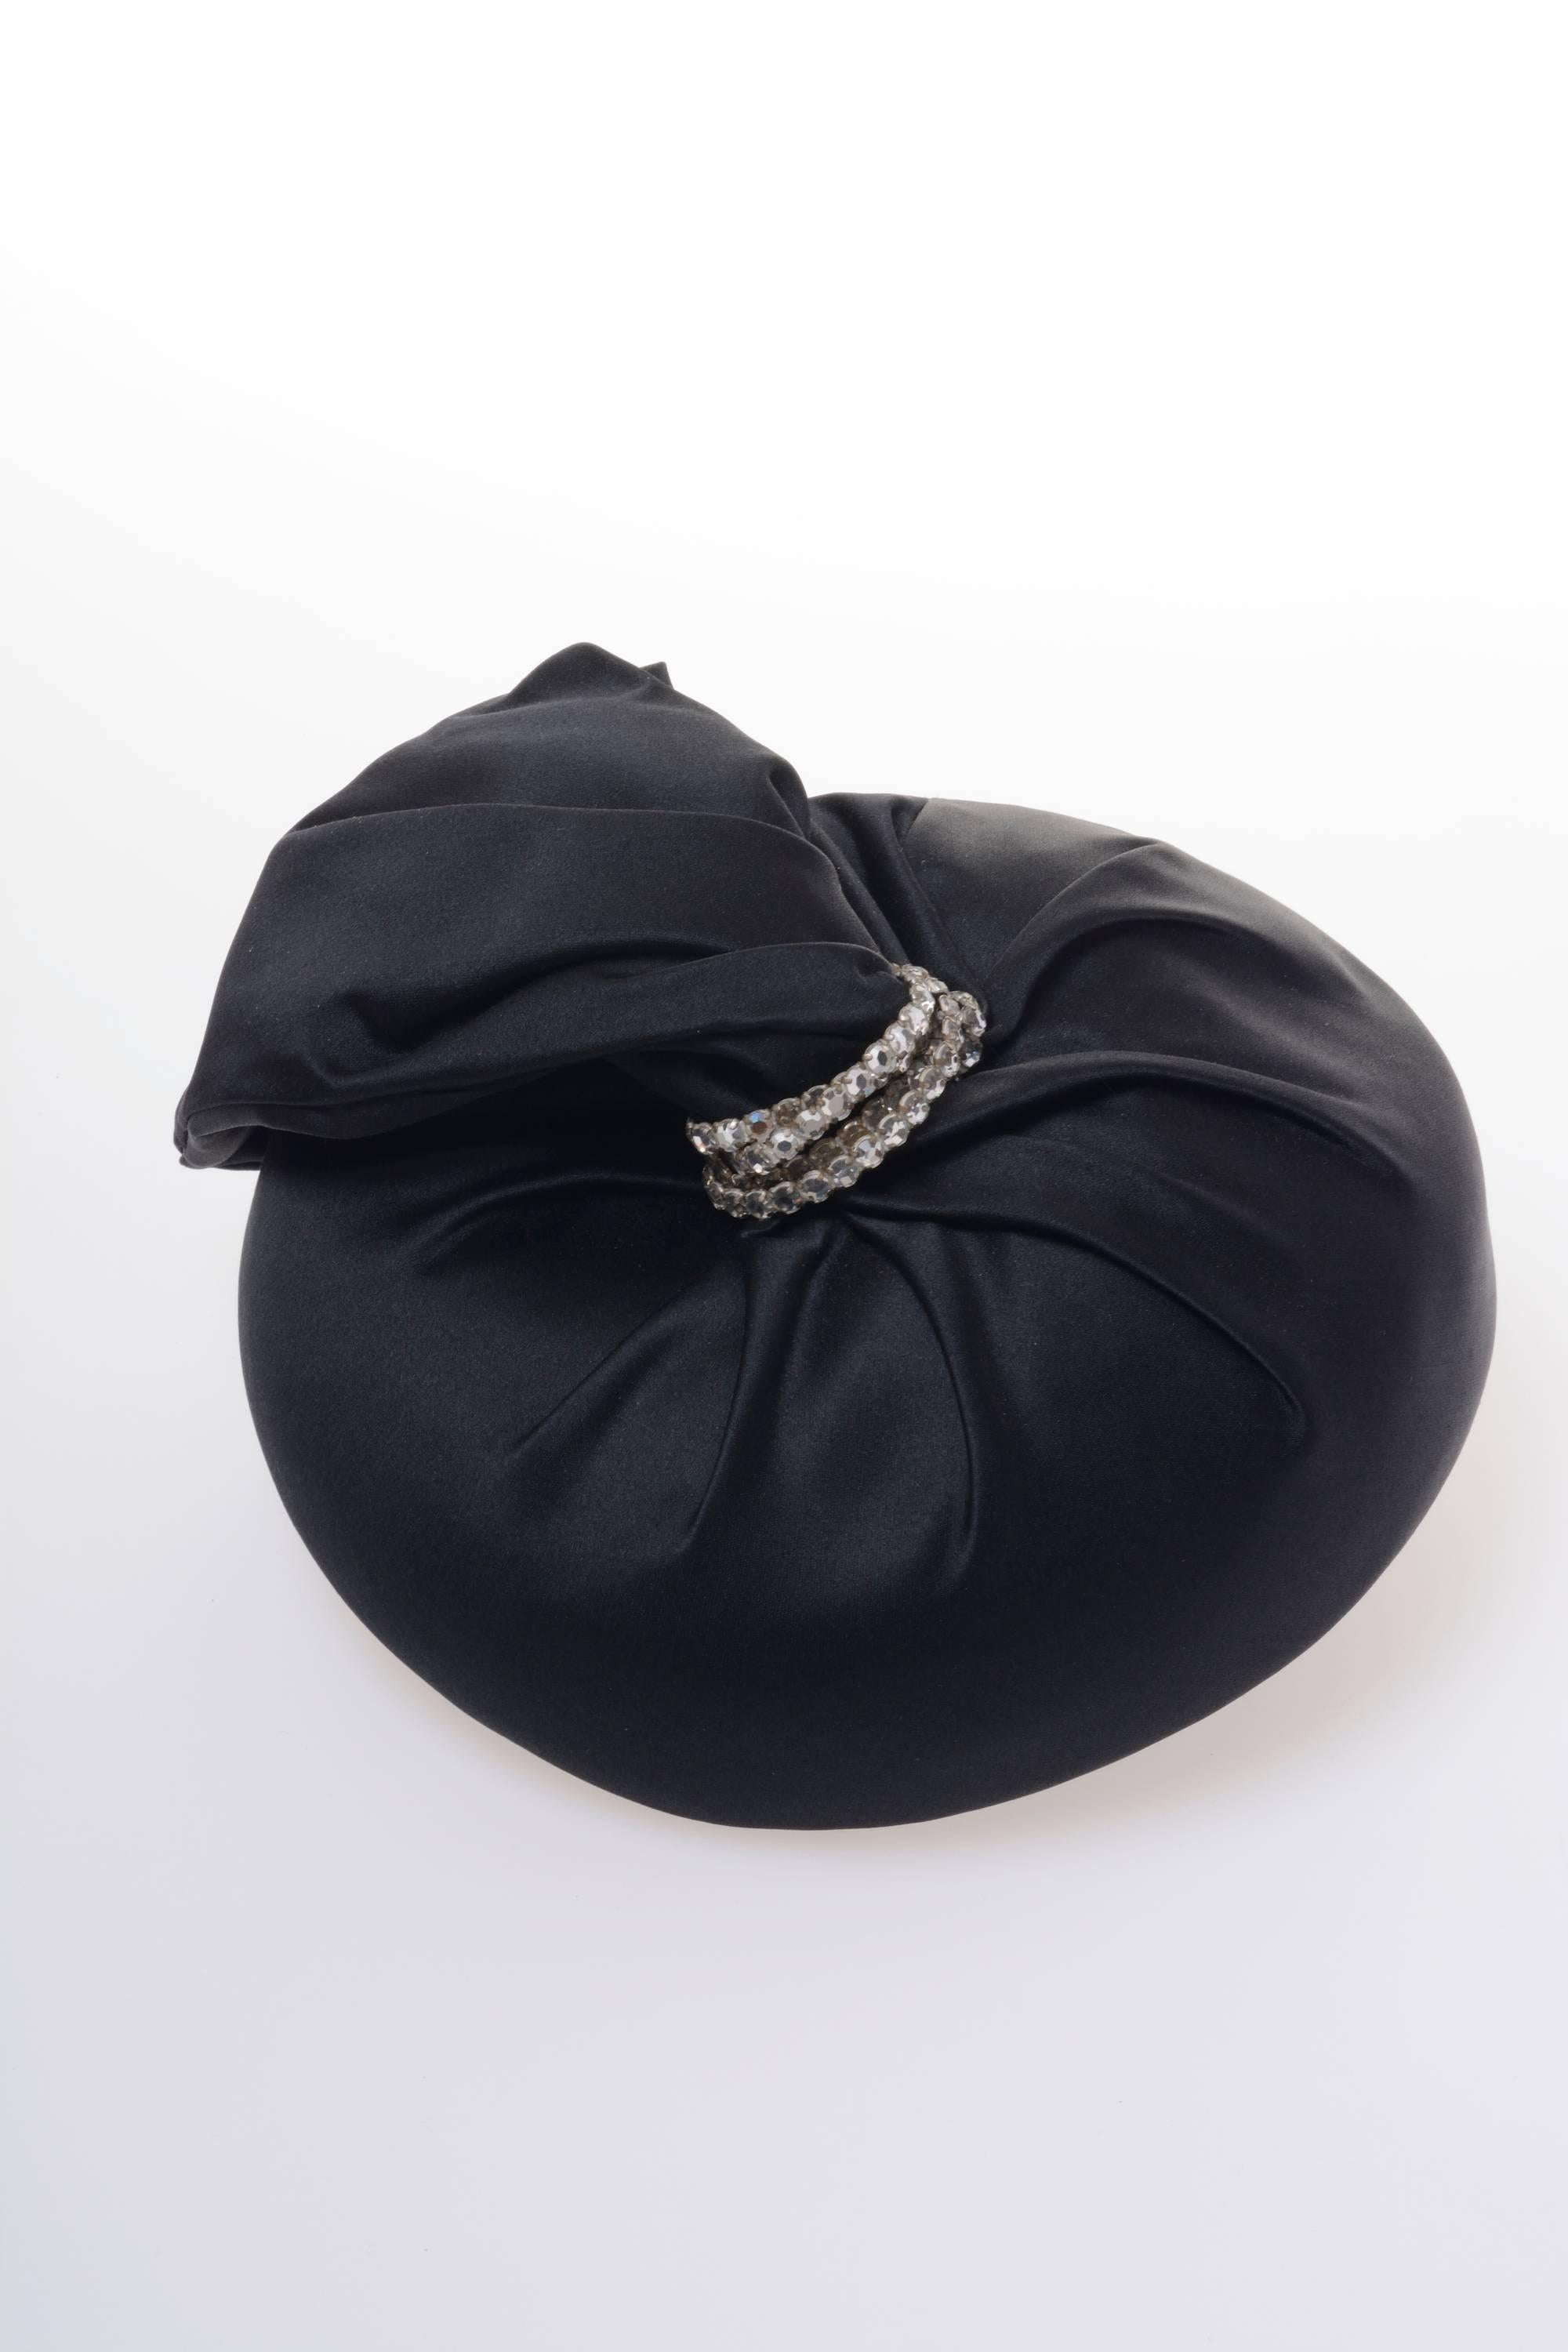 1960s GALLIA PETER Black Pillbox Fascinator Hat In Excellent Condition For Sale In Milan, Italy